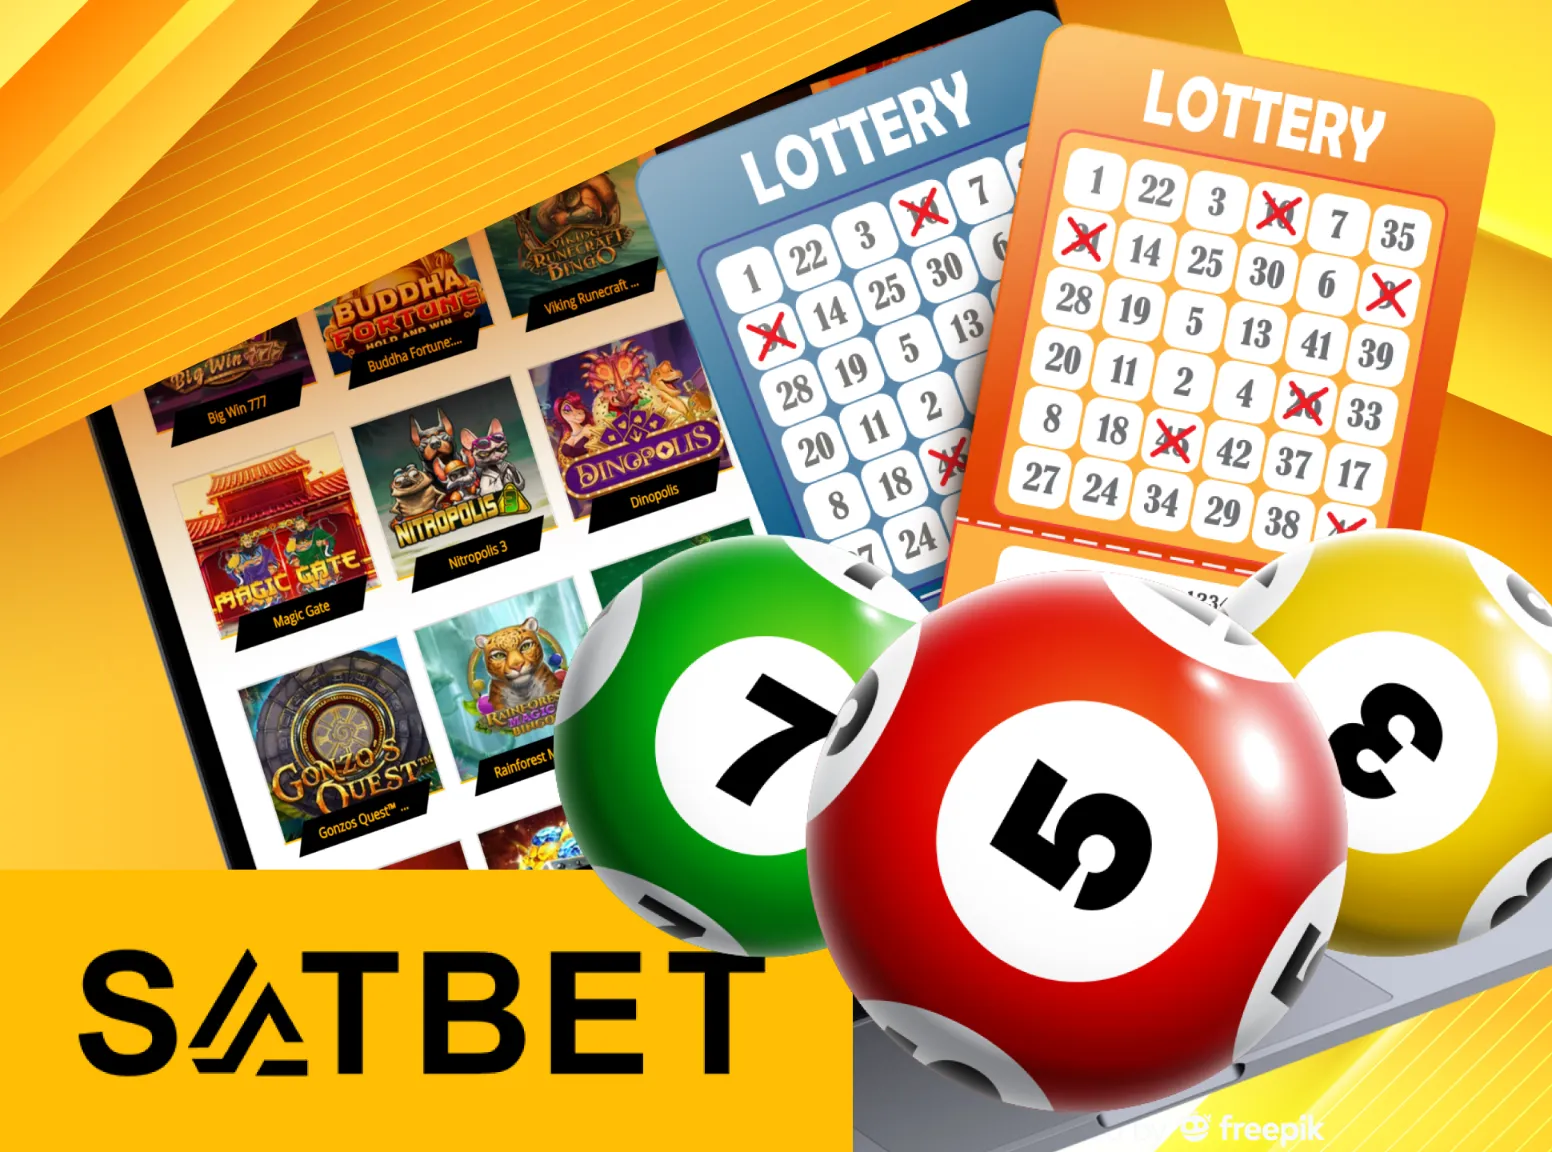 Play Satbet lotteries and win money.